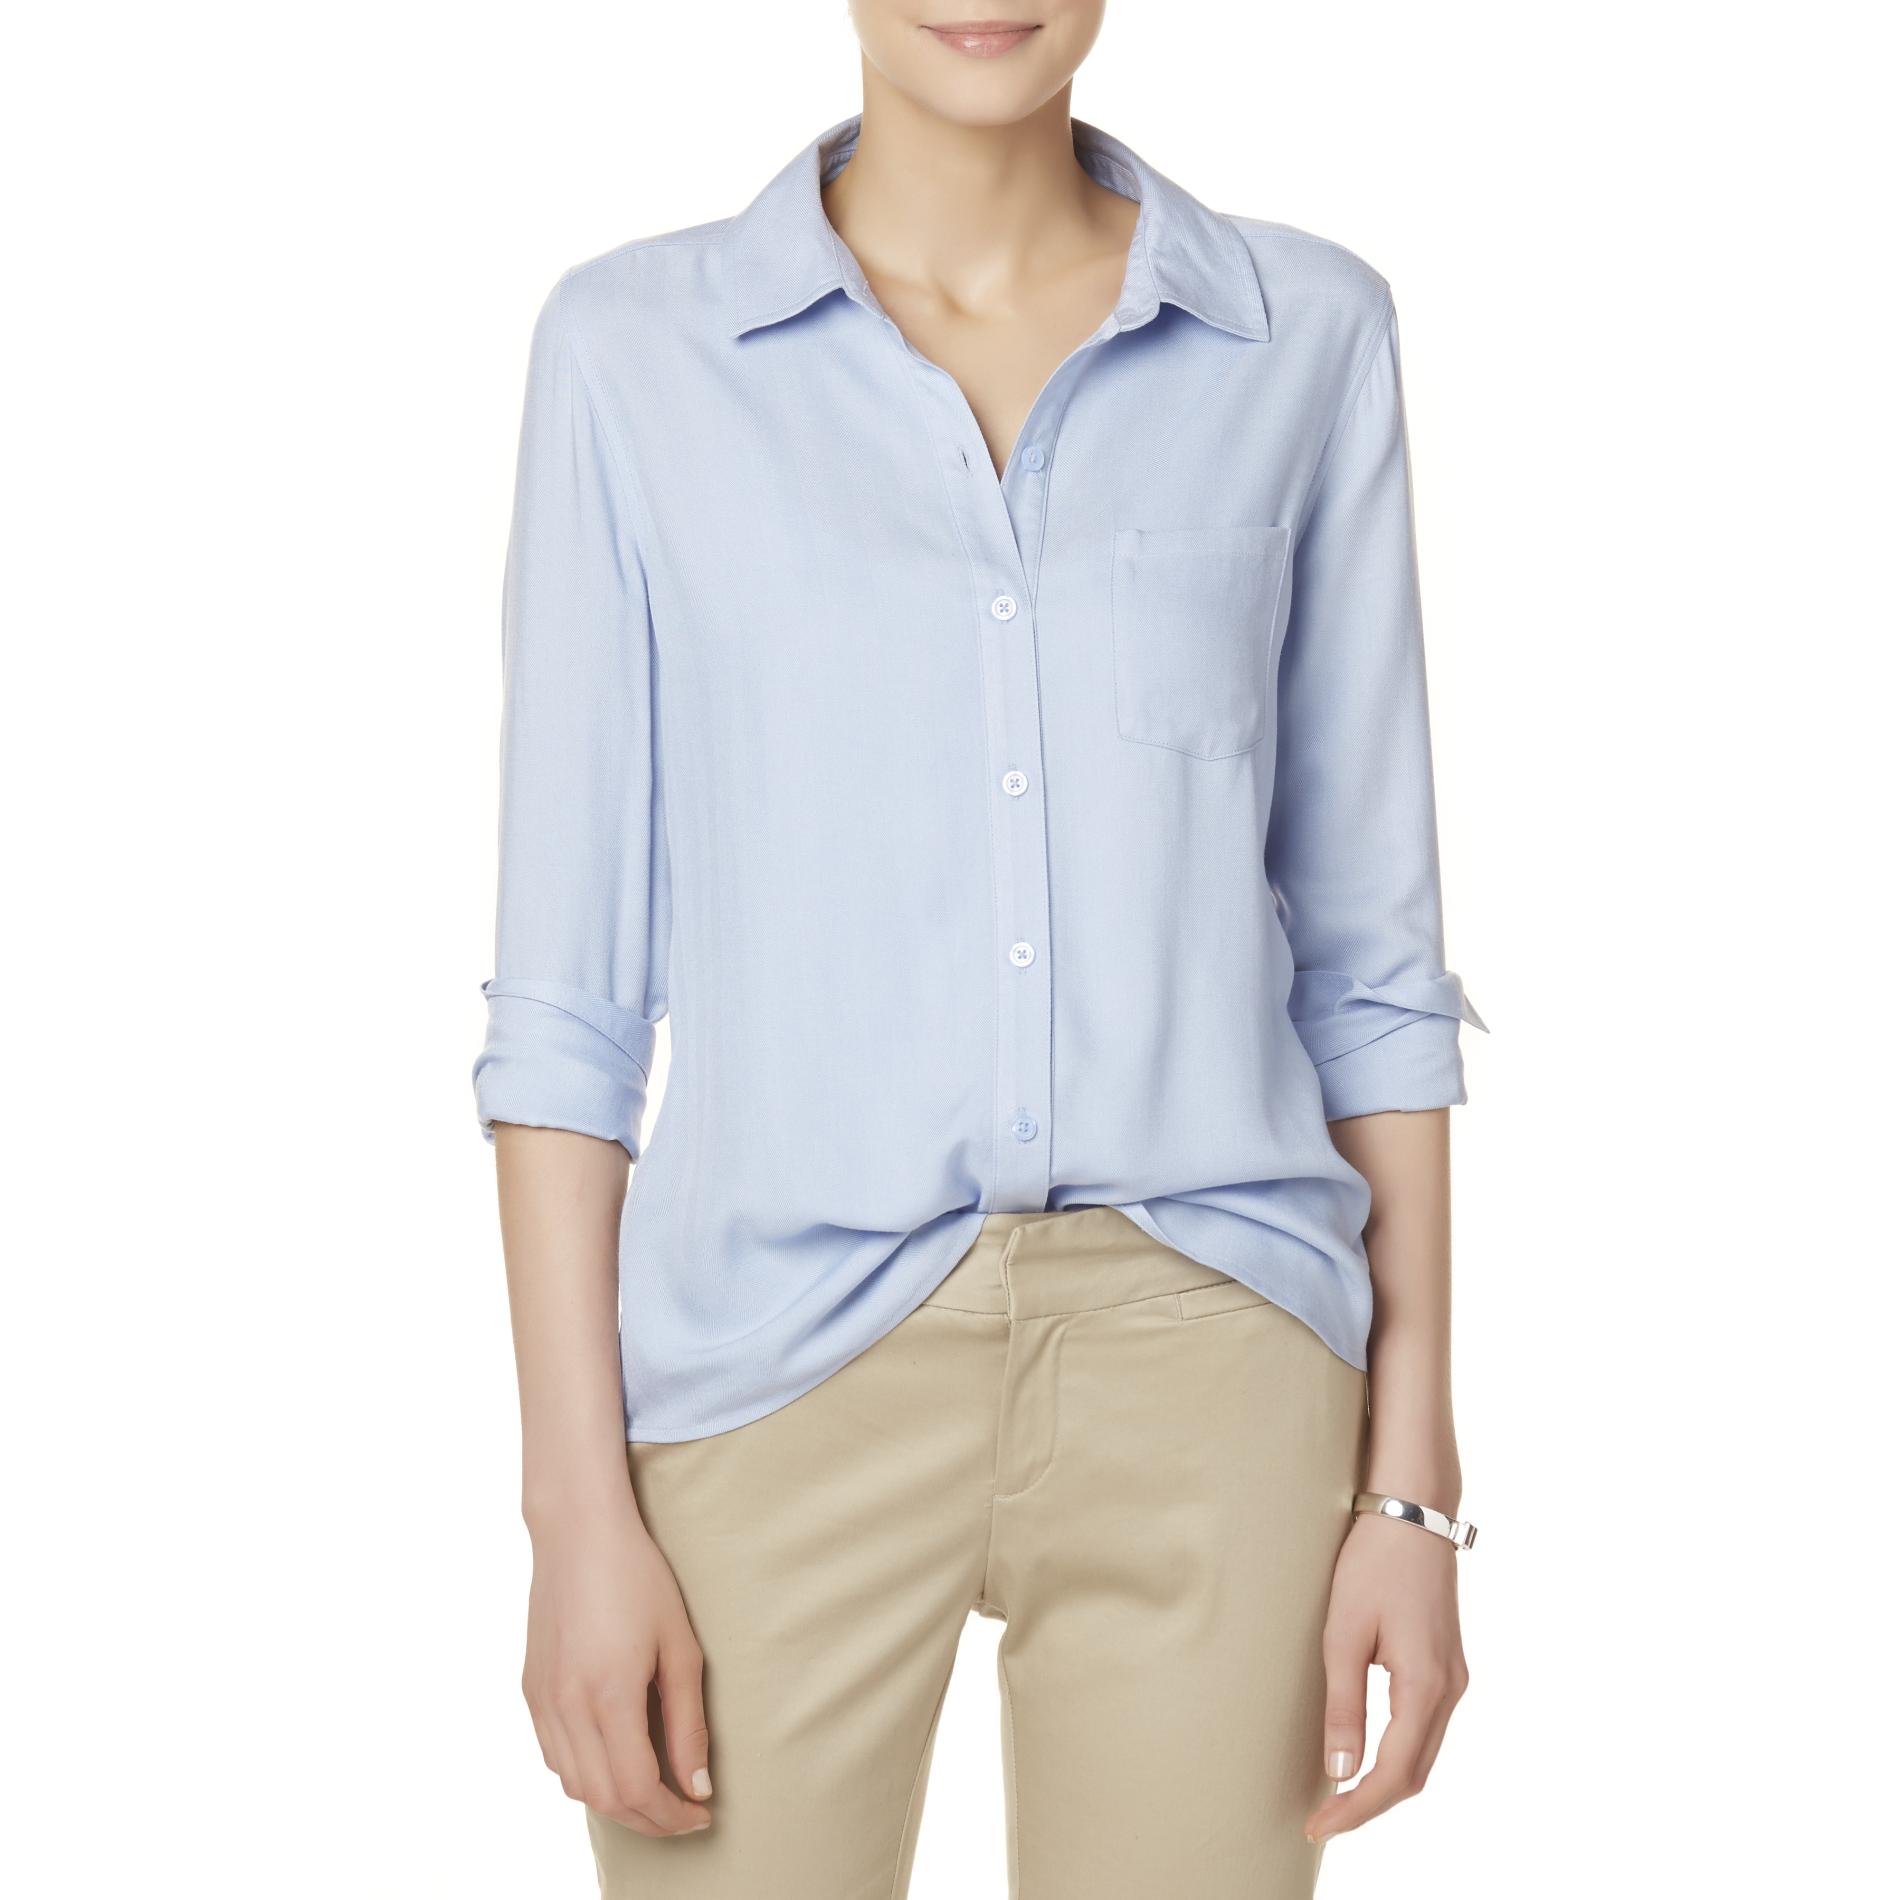 Simply Styled Women's Blouse